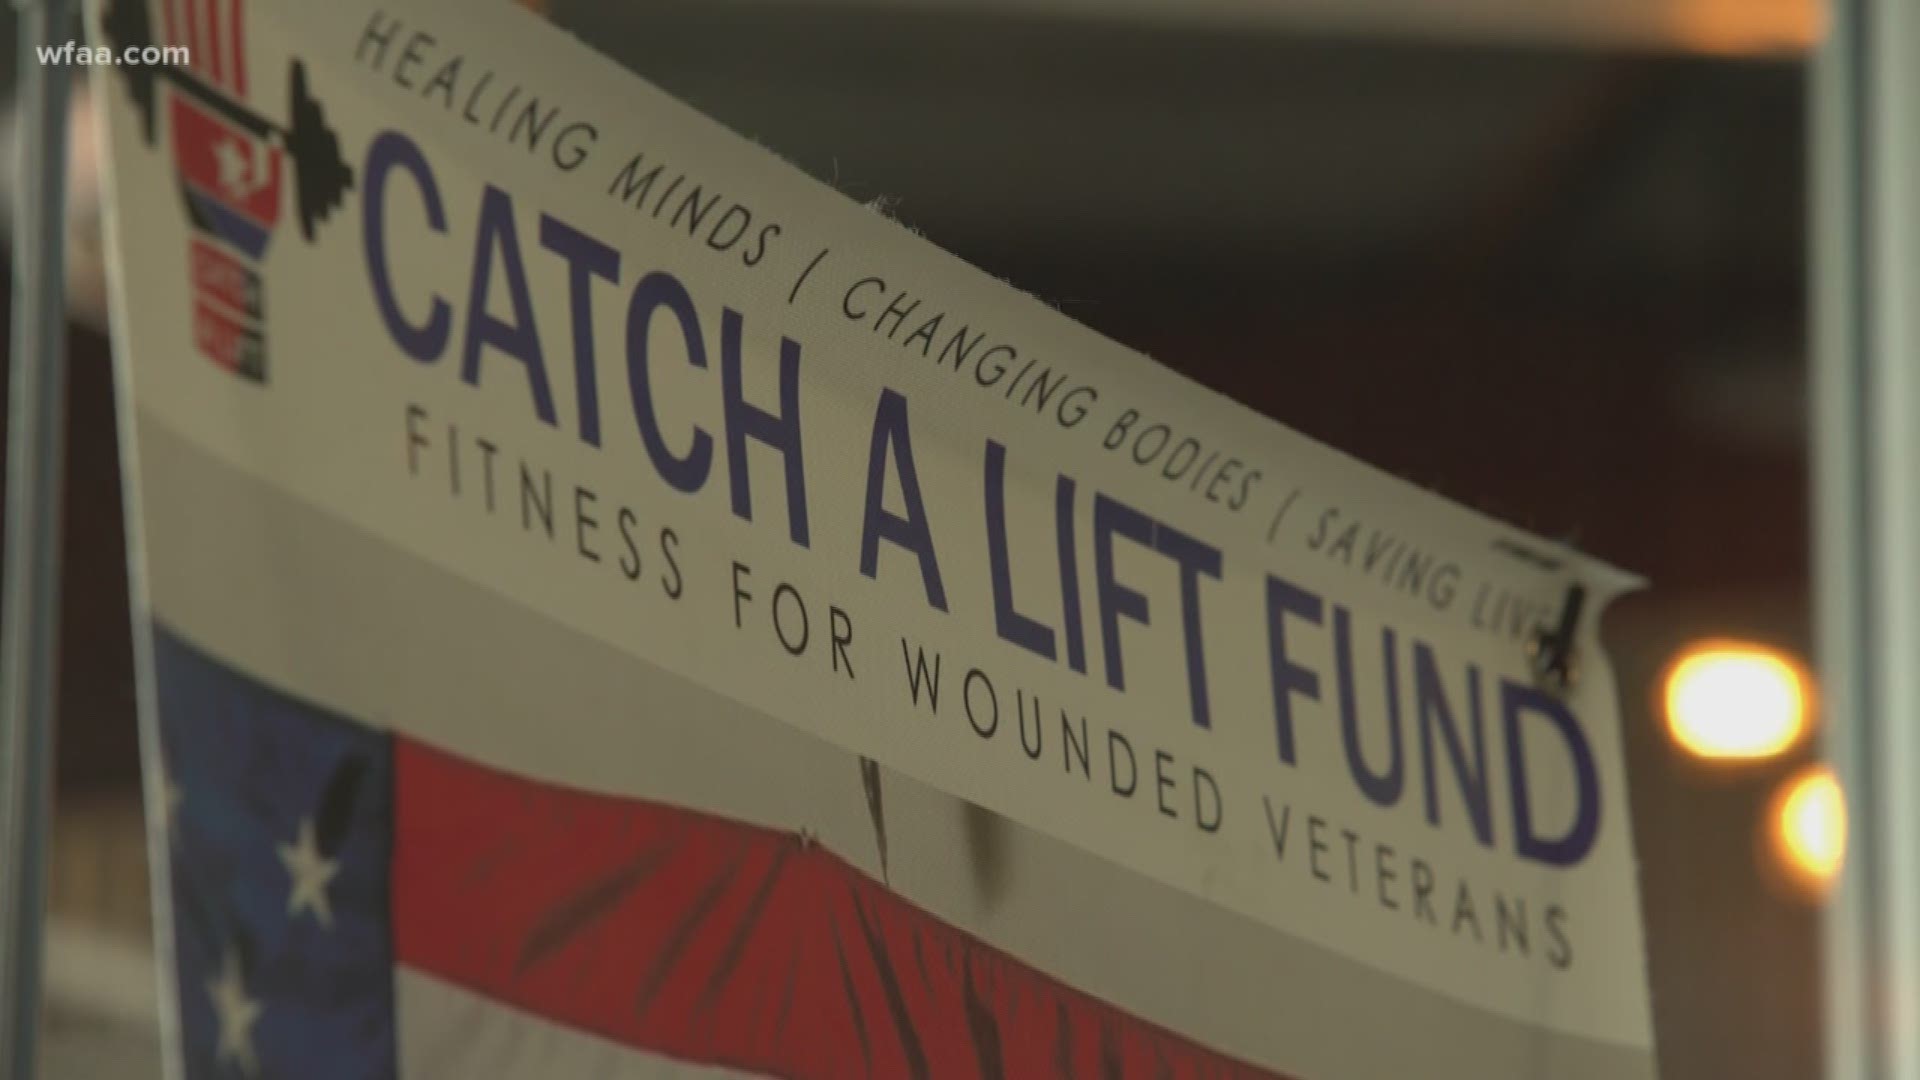 The idea of the Catch a Lift Fund is to provide gym memberships, trainers, and gym equipment to veterans battling physical injuries and PTSD.